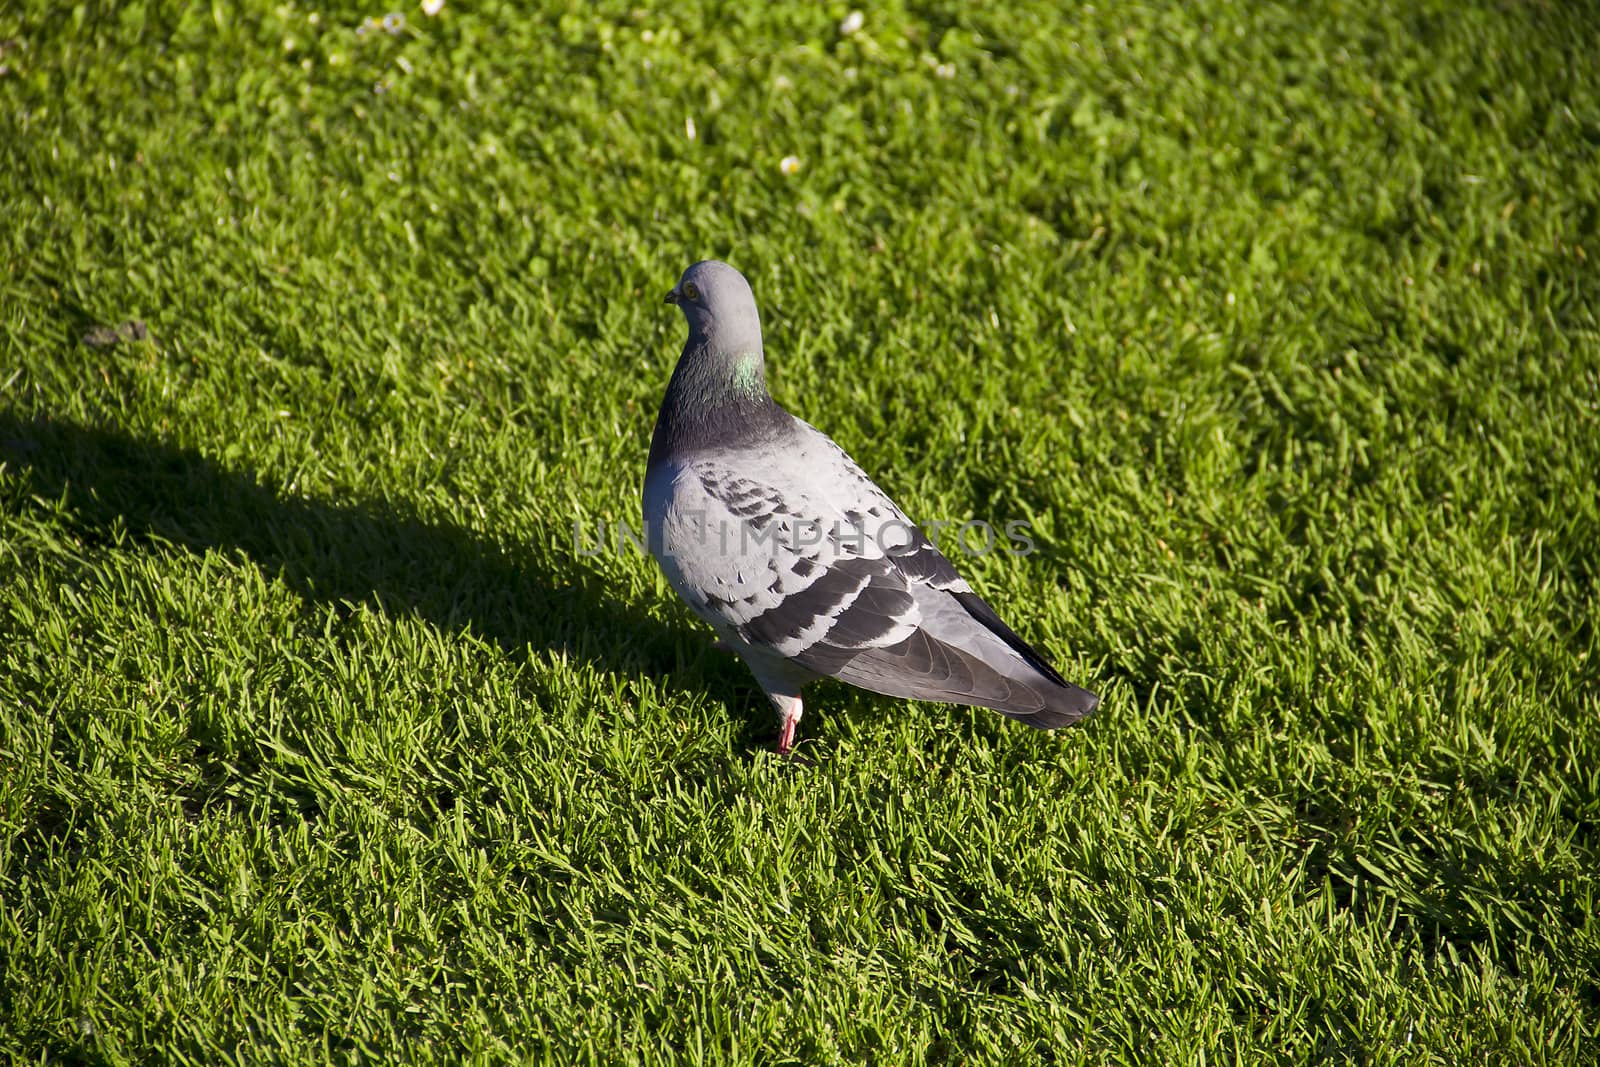 Caught in the bright sunlight a lovely pigeon